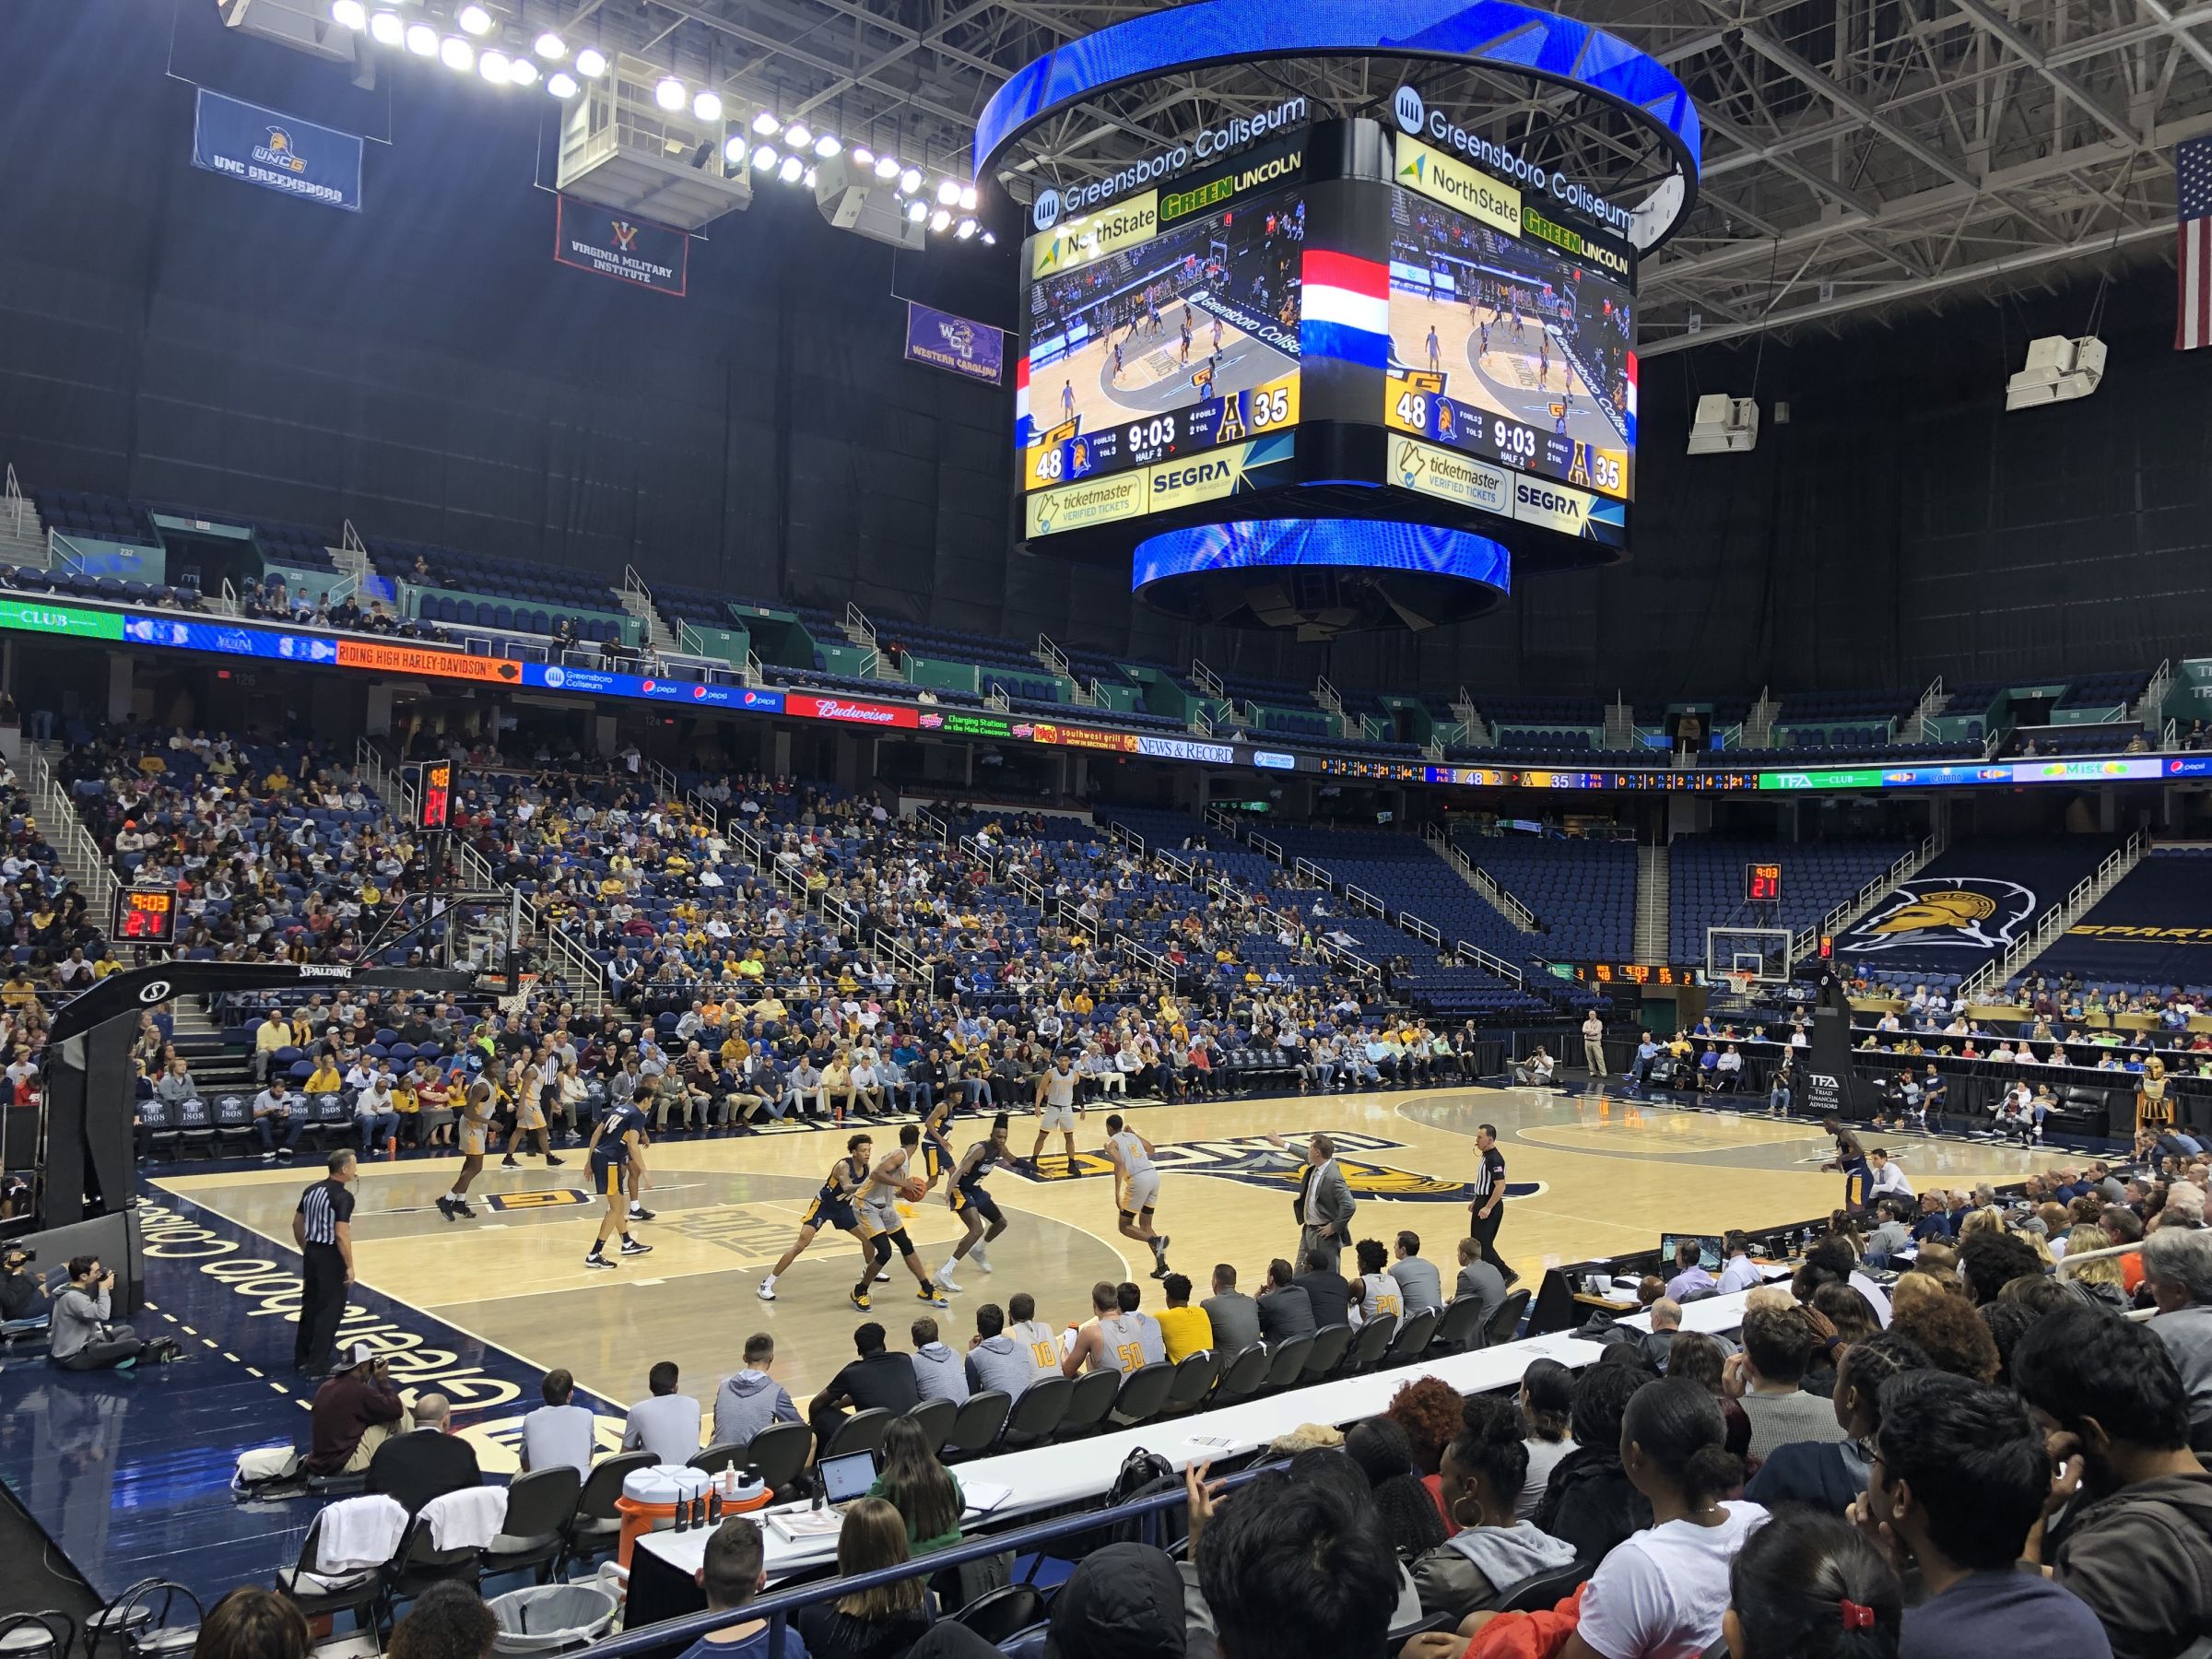 section 106, row ff seat view  for basketball - greensboro coliseum